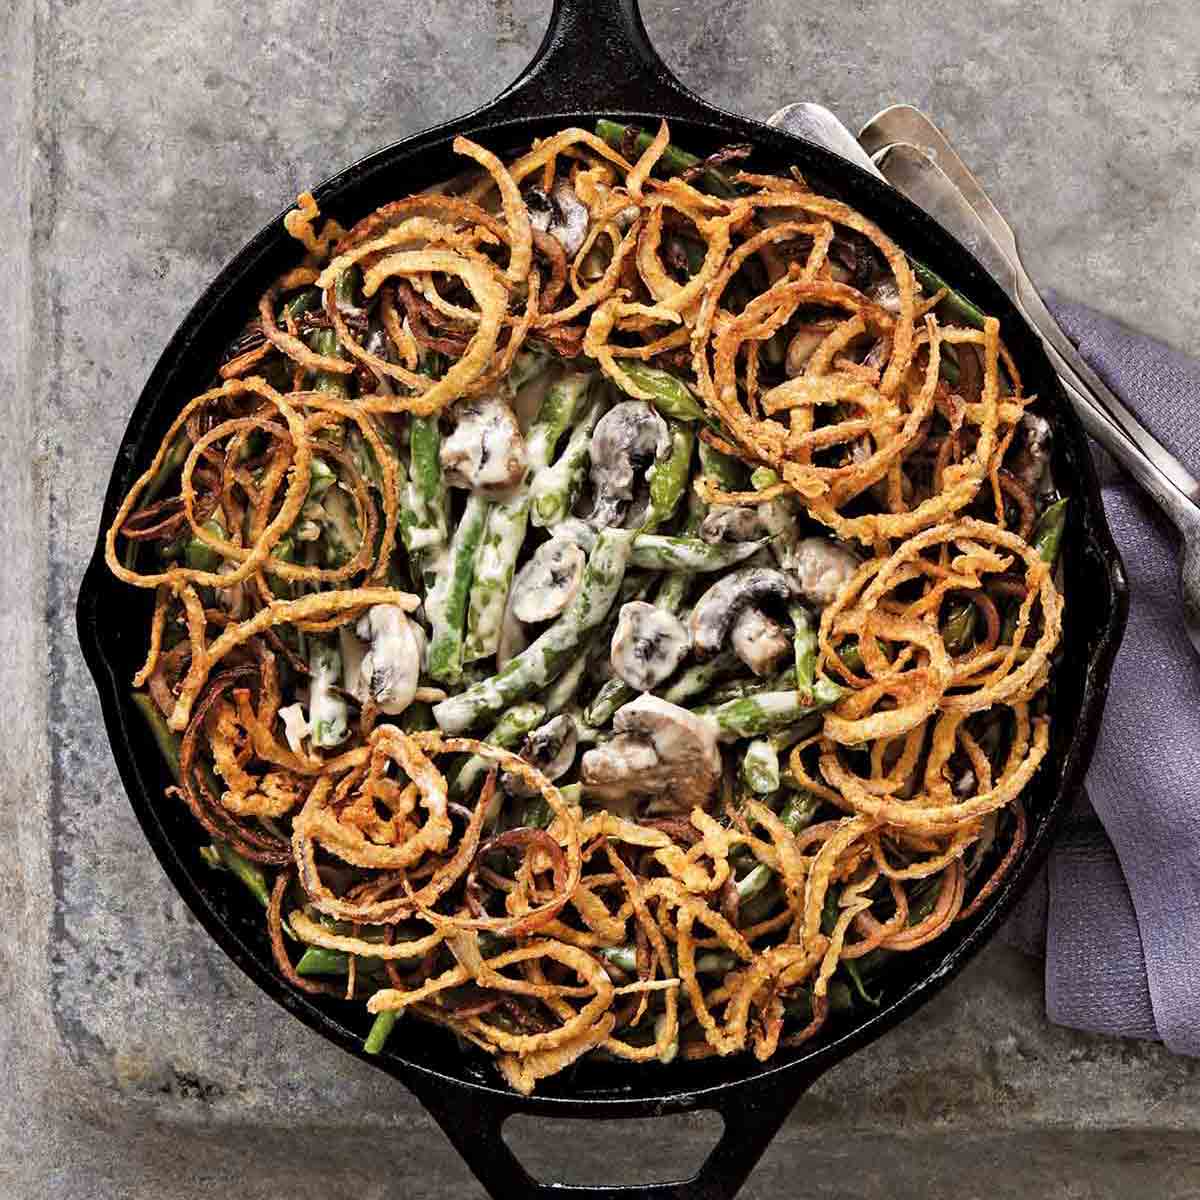 A classic green bean casserole with mushrooms and topped with fried onion rings in a cast-iron skillet.